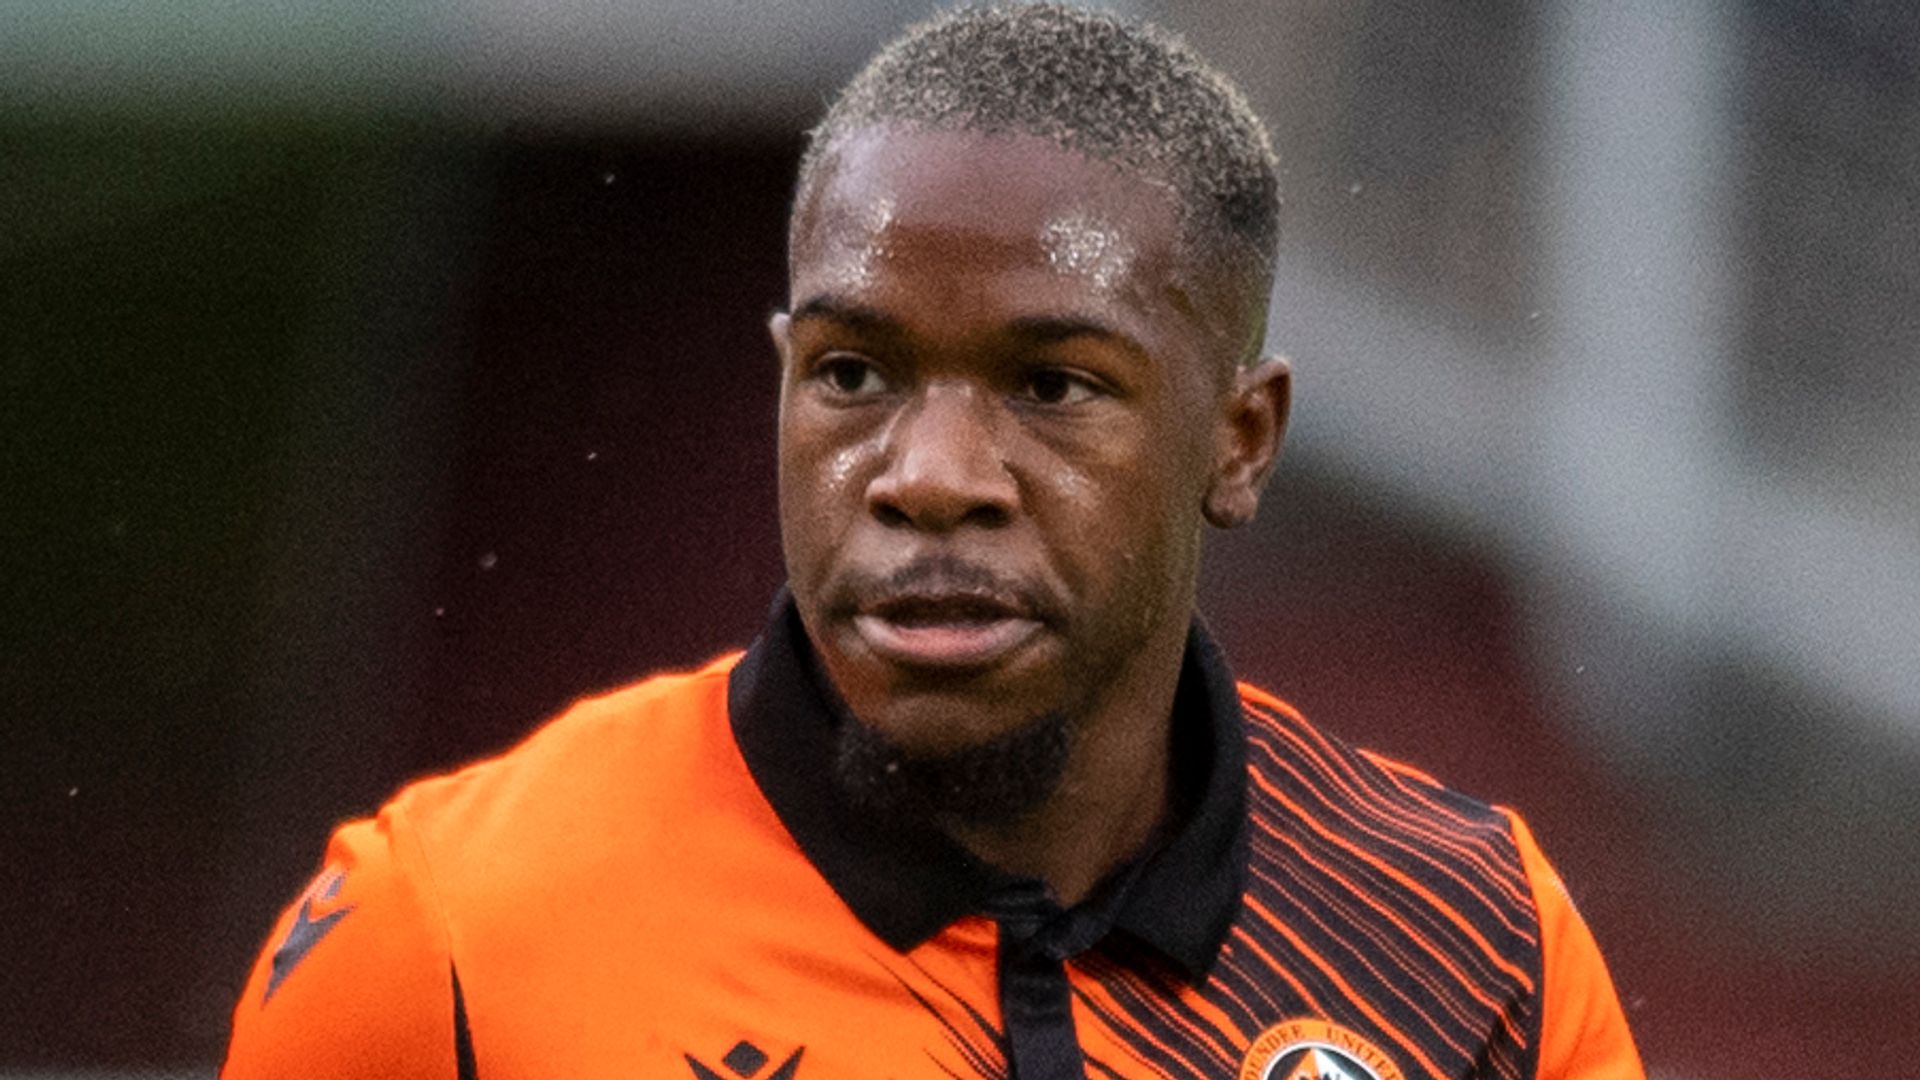 Dundee Utd pass findings to police after racist abuse allegation